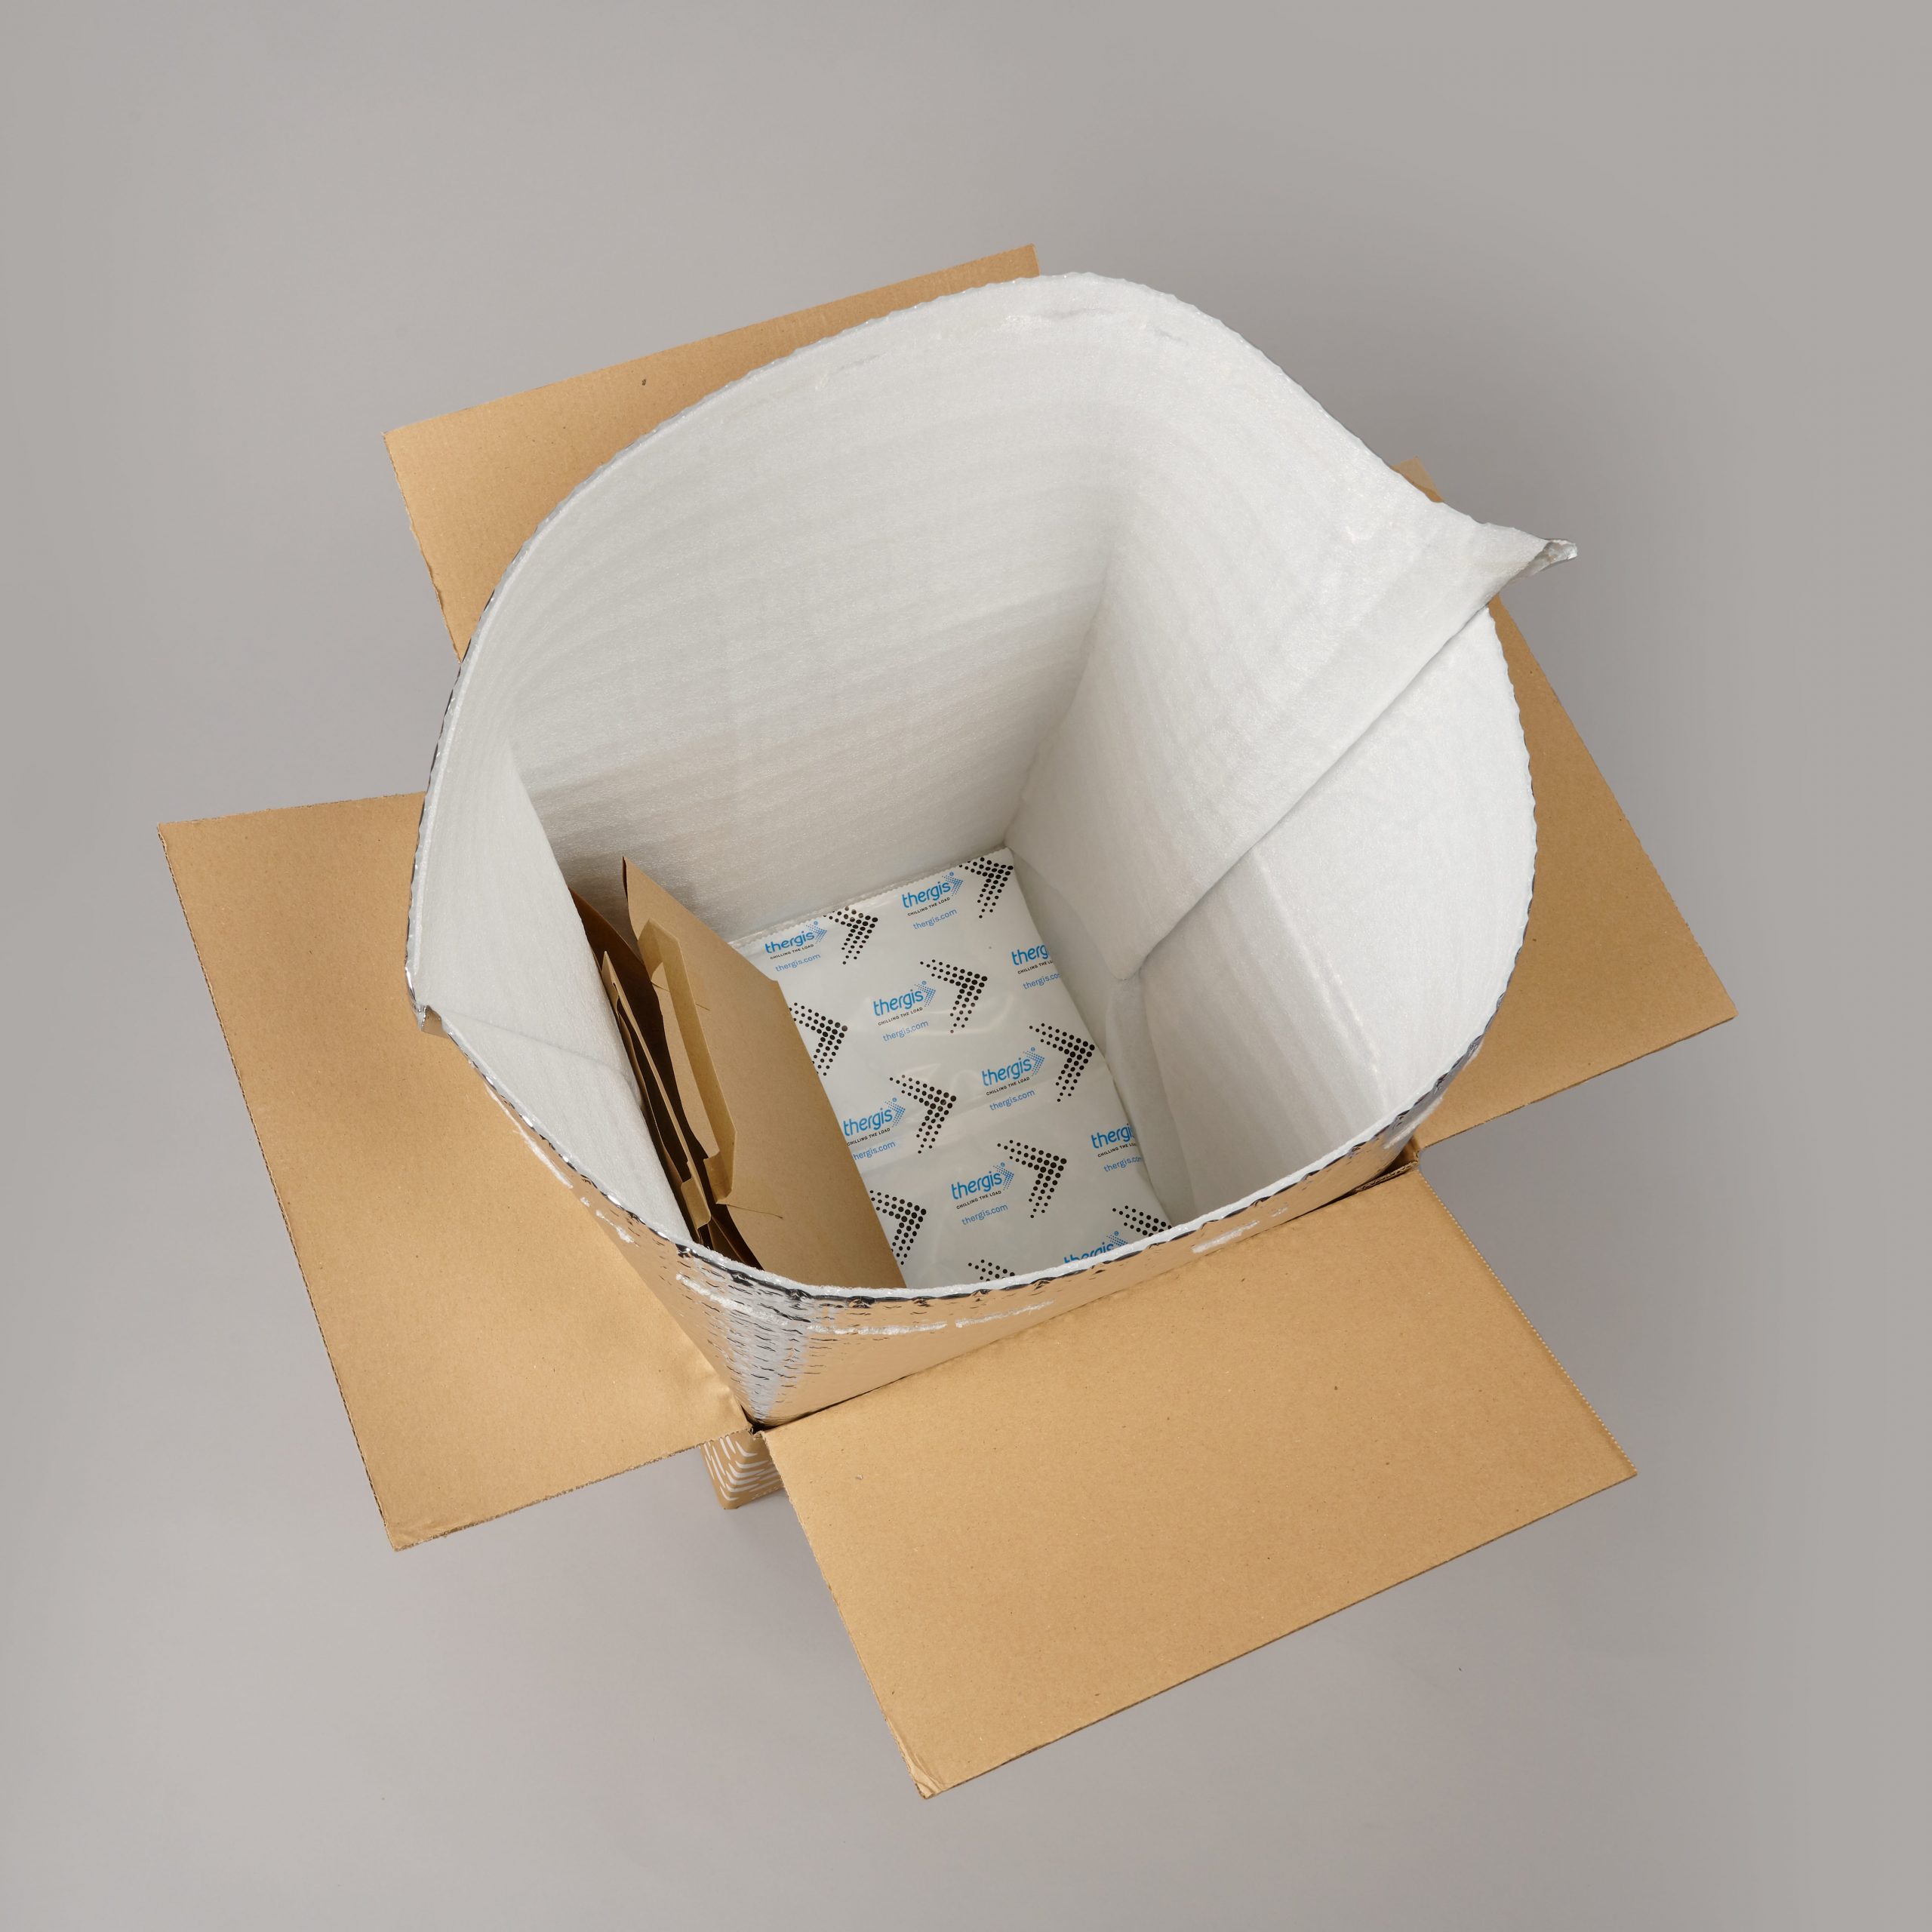 Best Box Liners for Business Shipping: Foil Liners